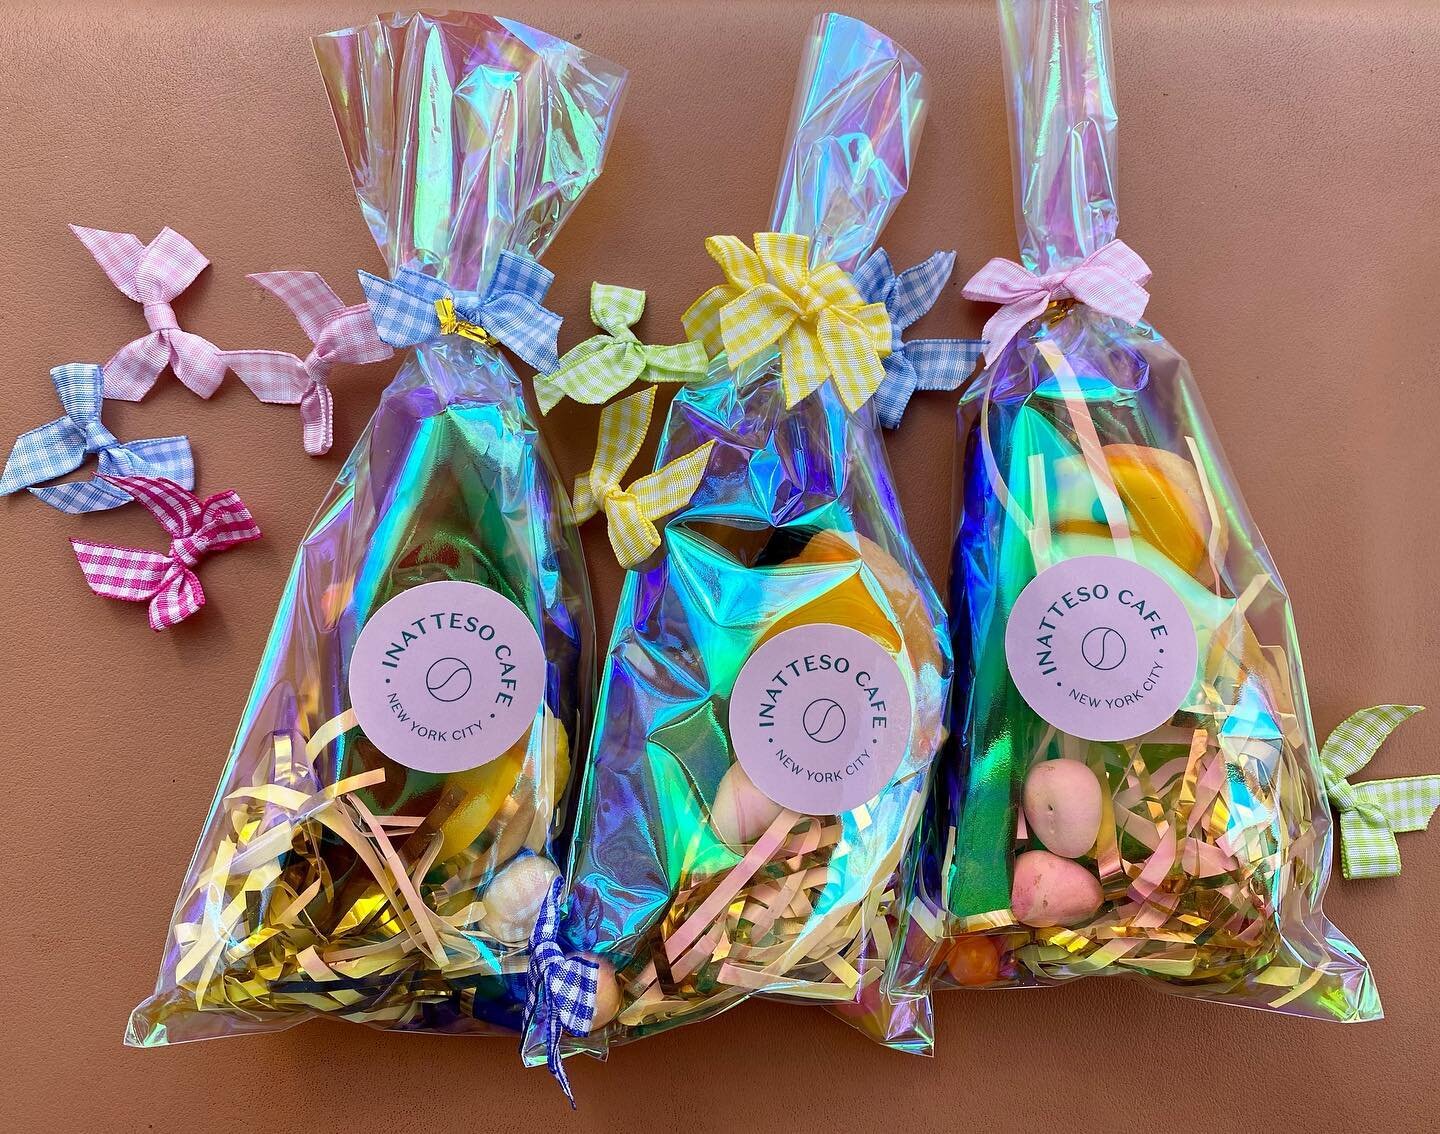 Stop in on the last day before Spring break to pick up our Easter Goody bags filled with homemade chocolates and sugar cookies! #eastercookies #easterchocolate